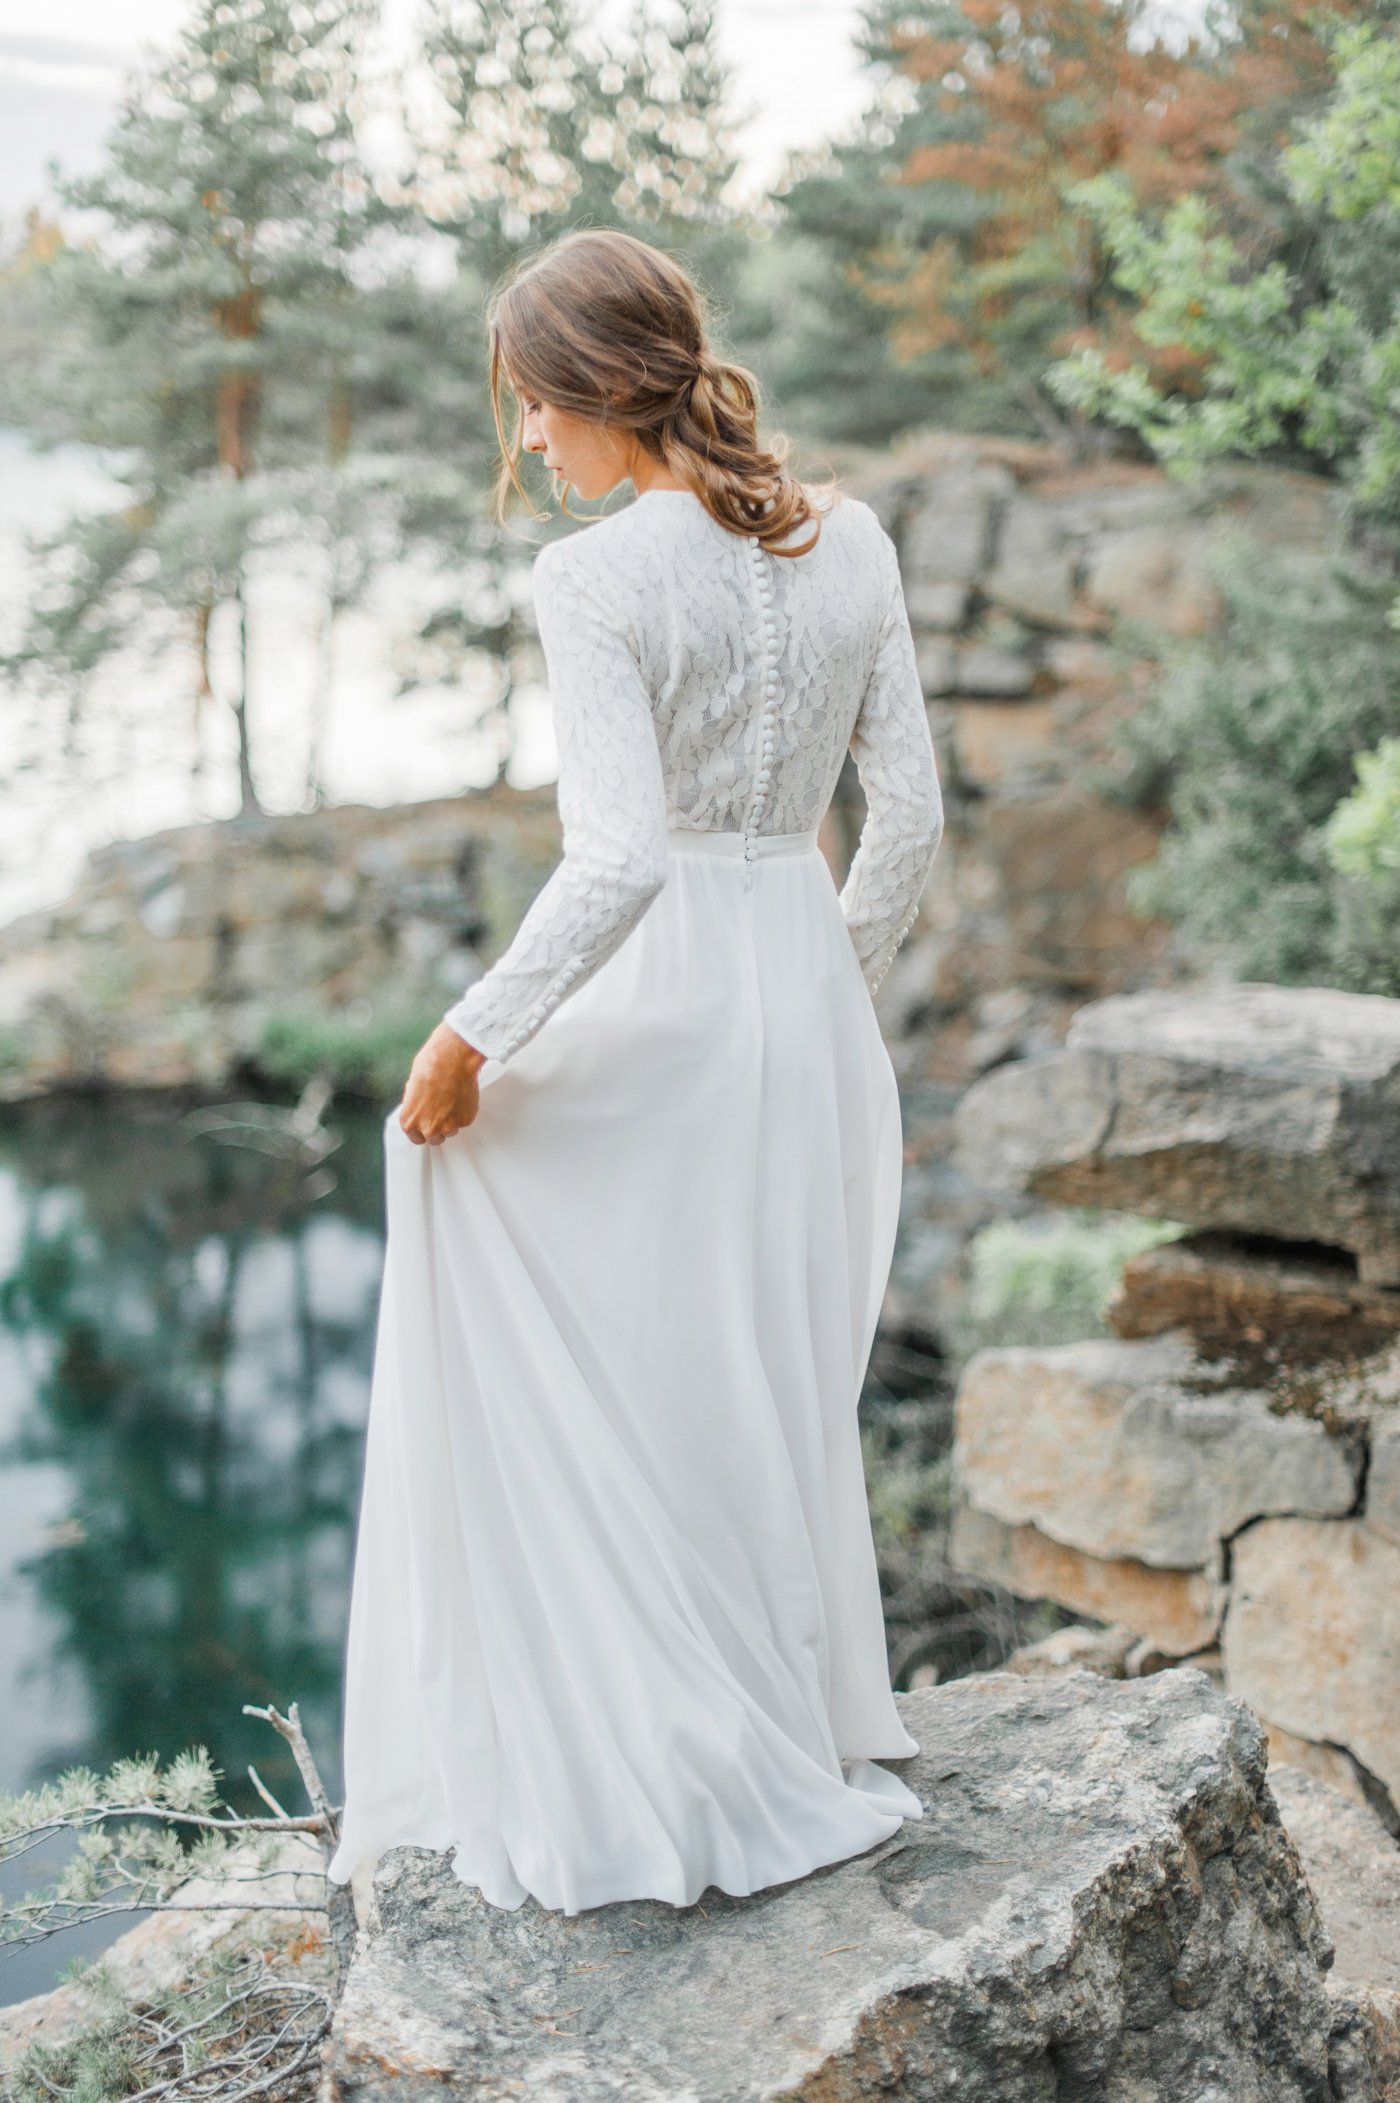 Wedding dress with high-neck bodice and long lace sleeve | Cathy Telle